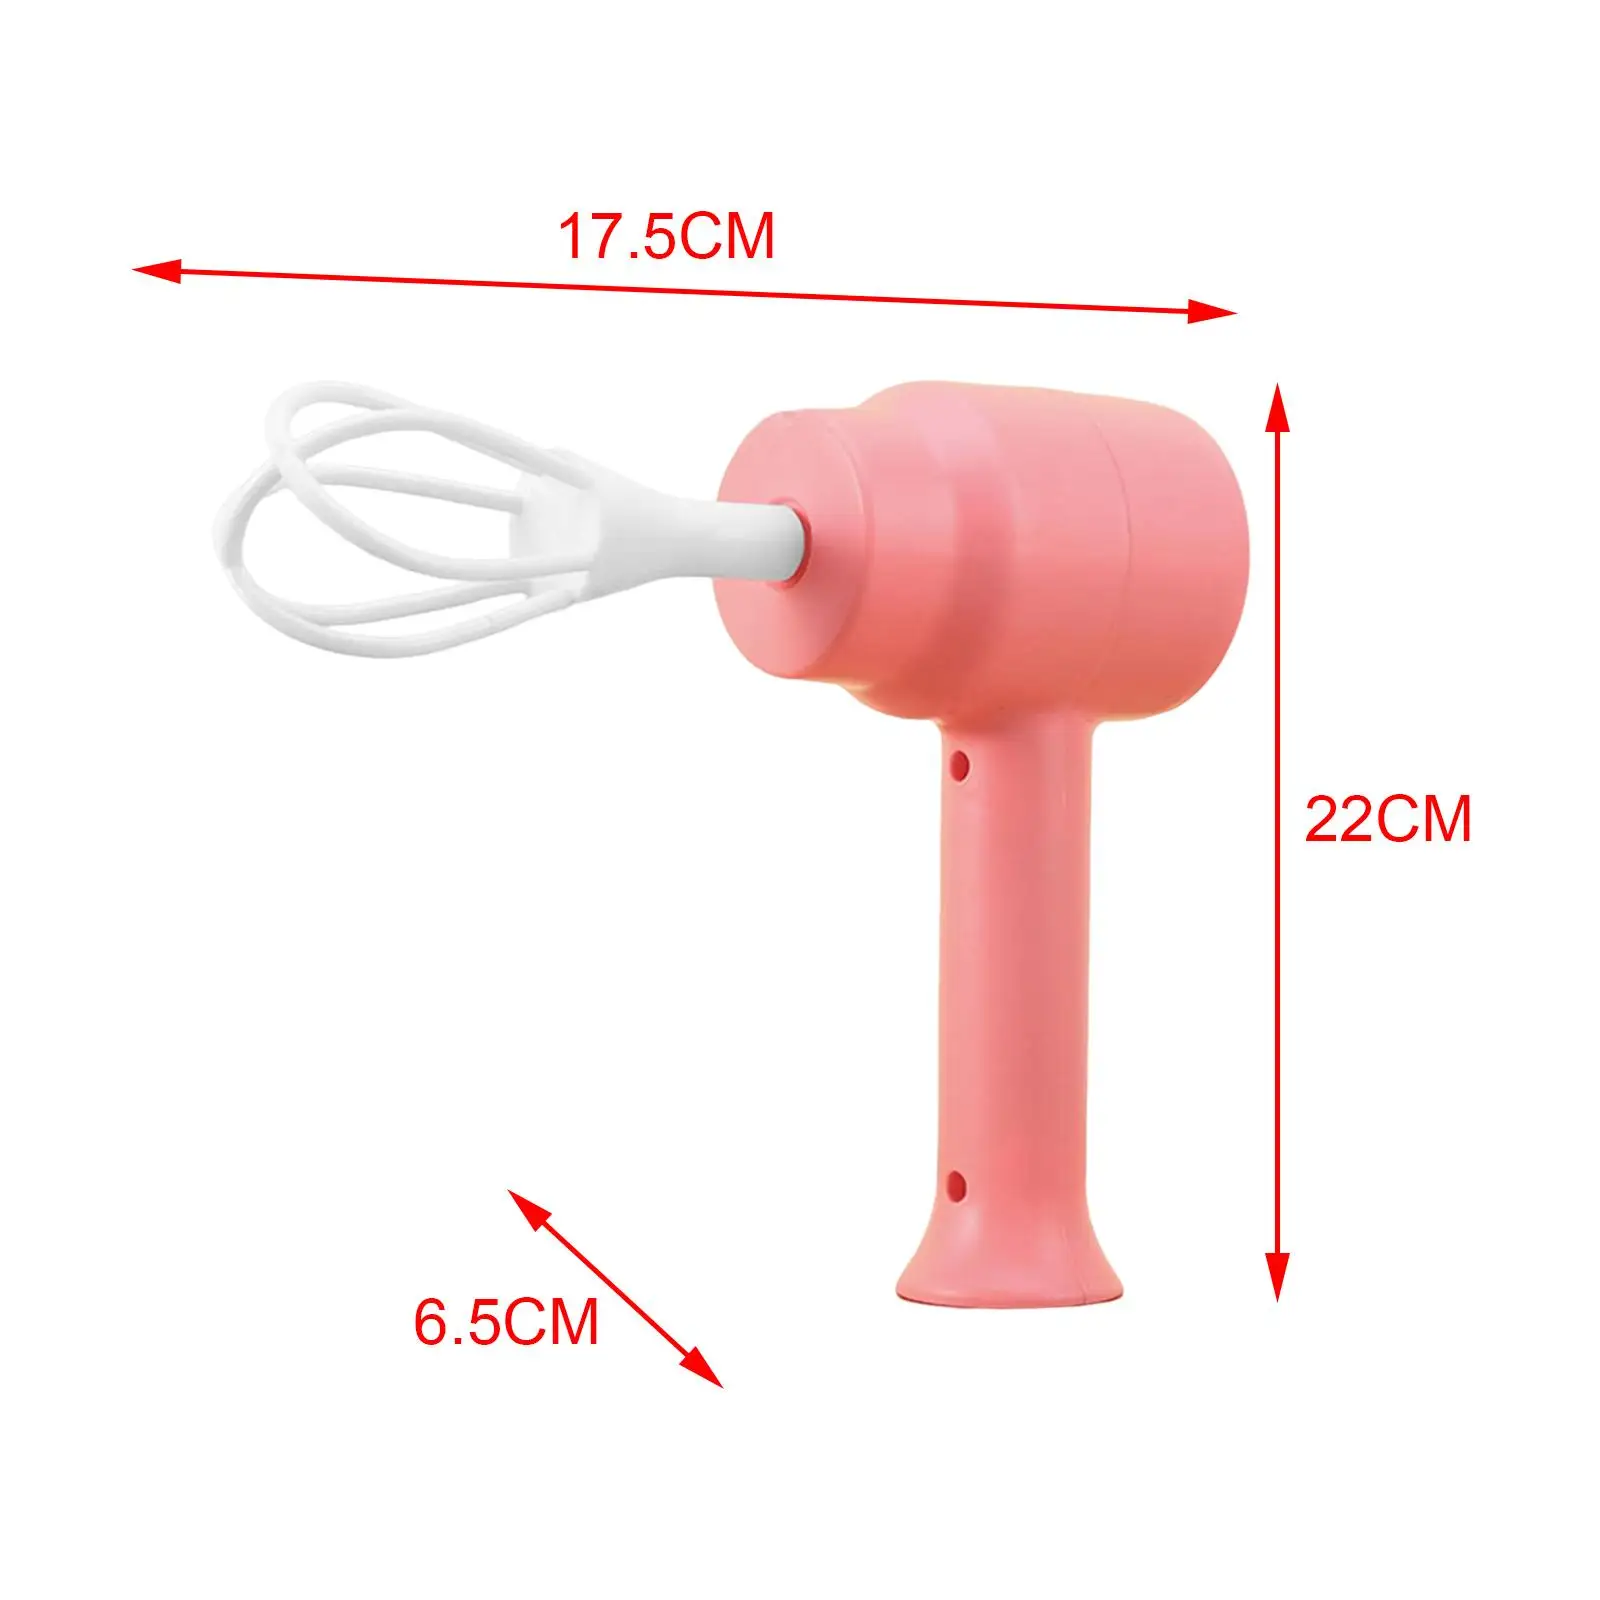 Milk Frother Handheld Foam Whisk Coffee Whisk Foam Mixer for Baking, Coffee, Hot Chocolate, Egg Household